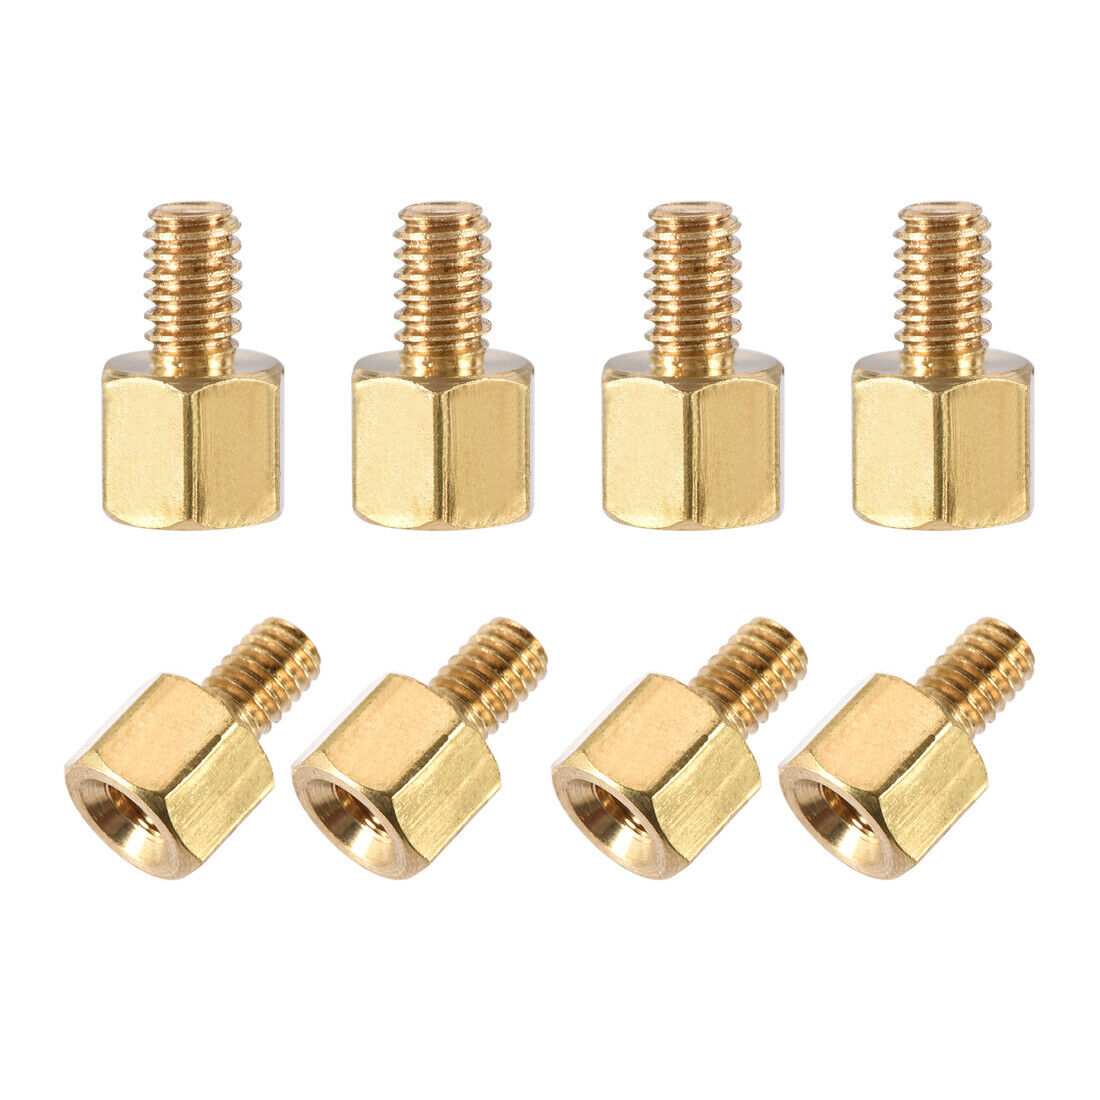 M2.5 X 5 Mm + 4 Mm Male To Female Hex Brass Spacer Standoff 100pcs